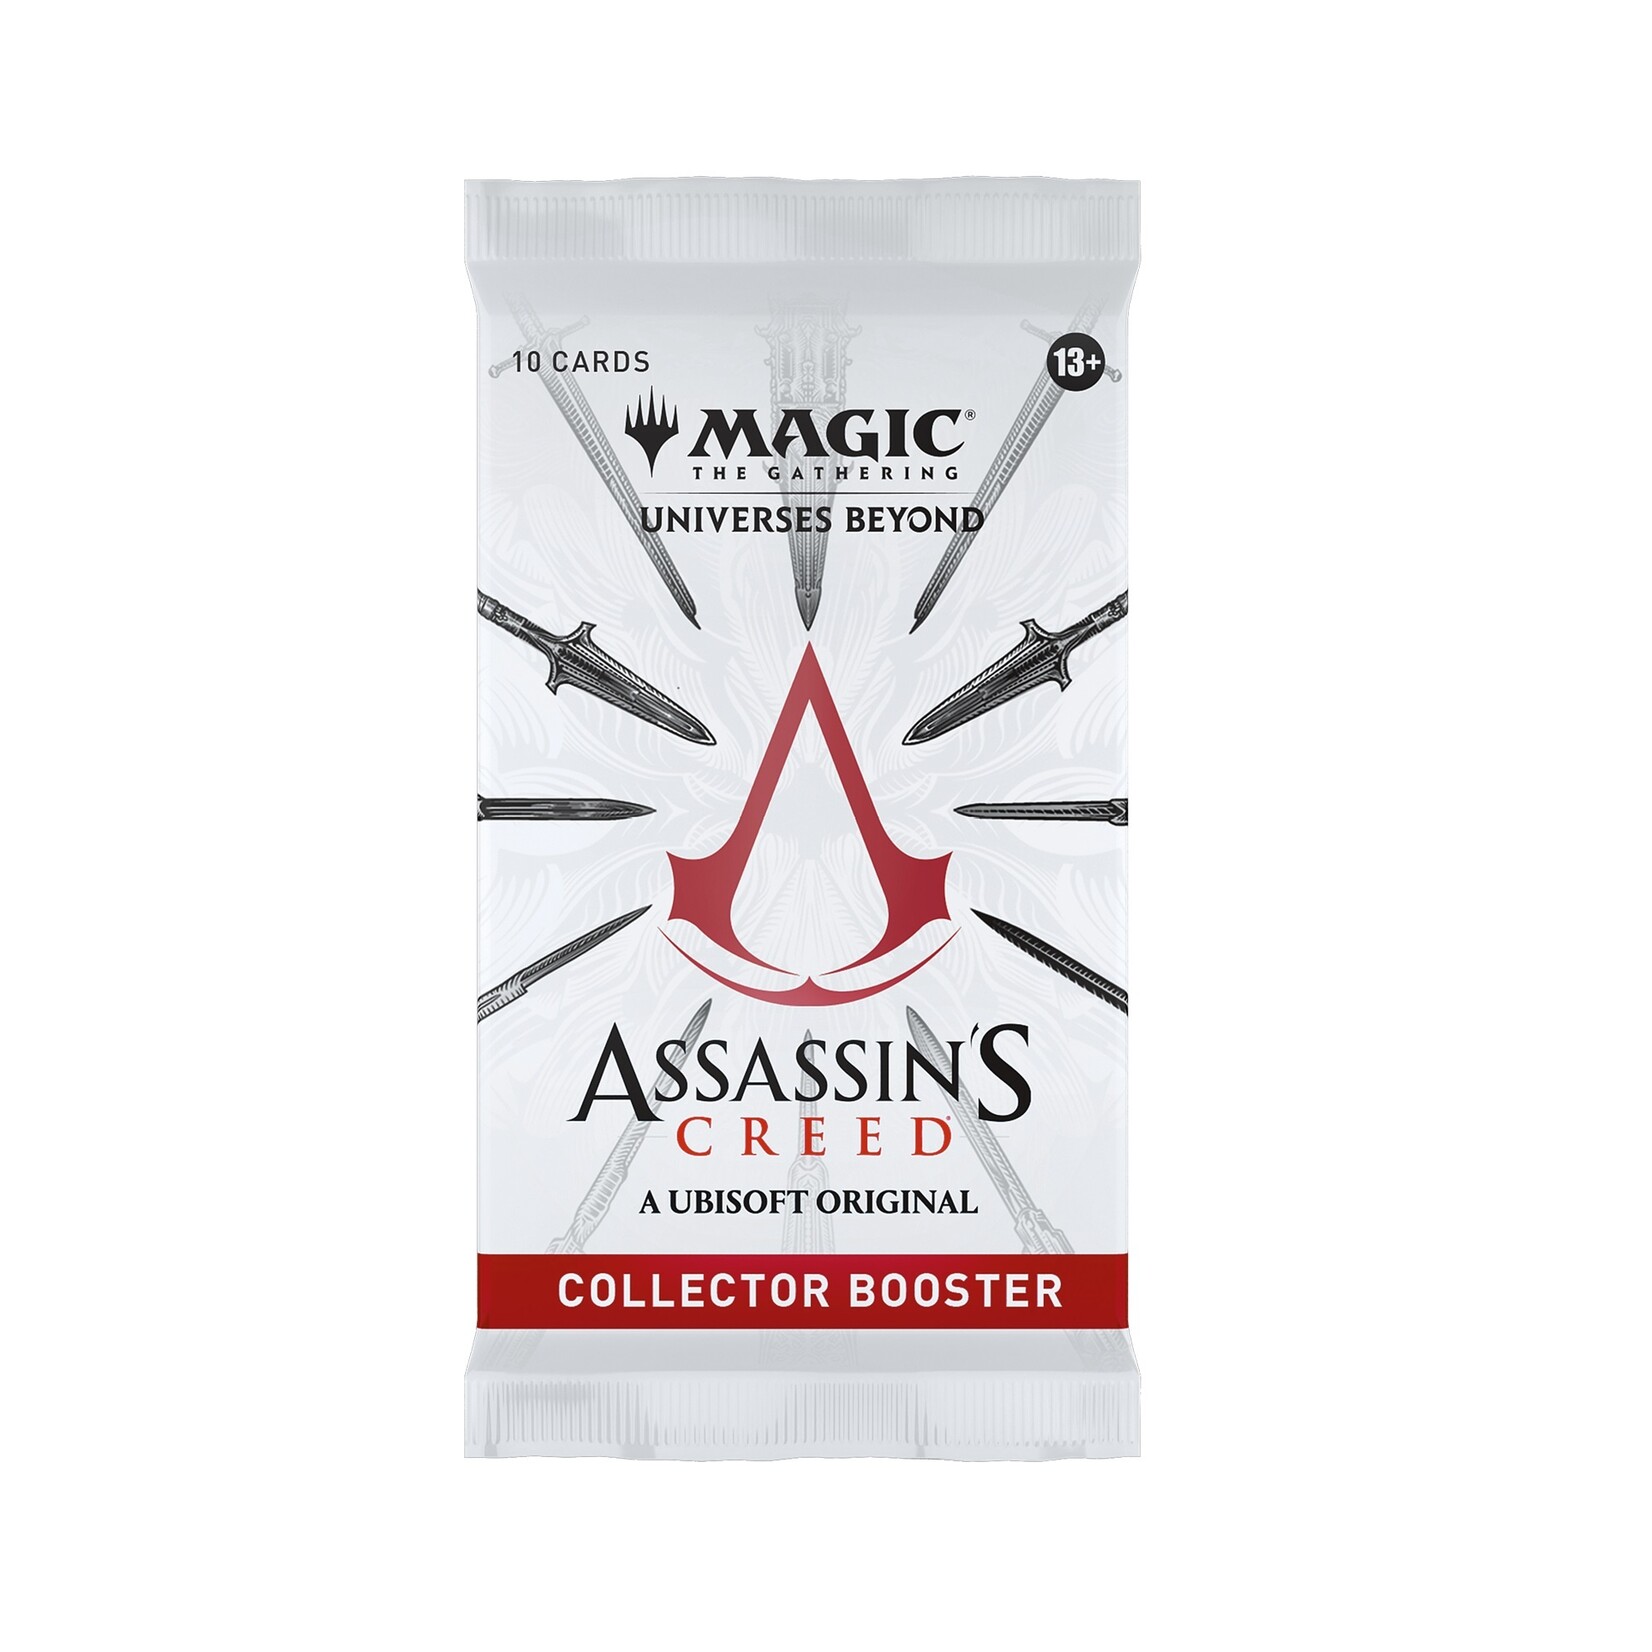 Wizard of the coast PRÉCOMMANDE - Magic The Gathering - Assassin's Creed Beyond  - Collector Booster Box